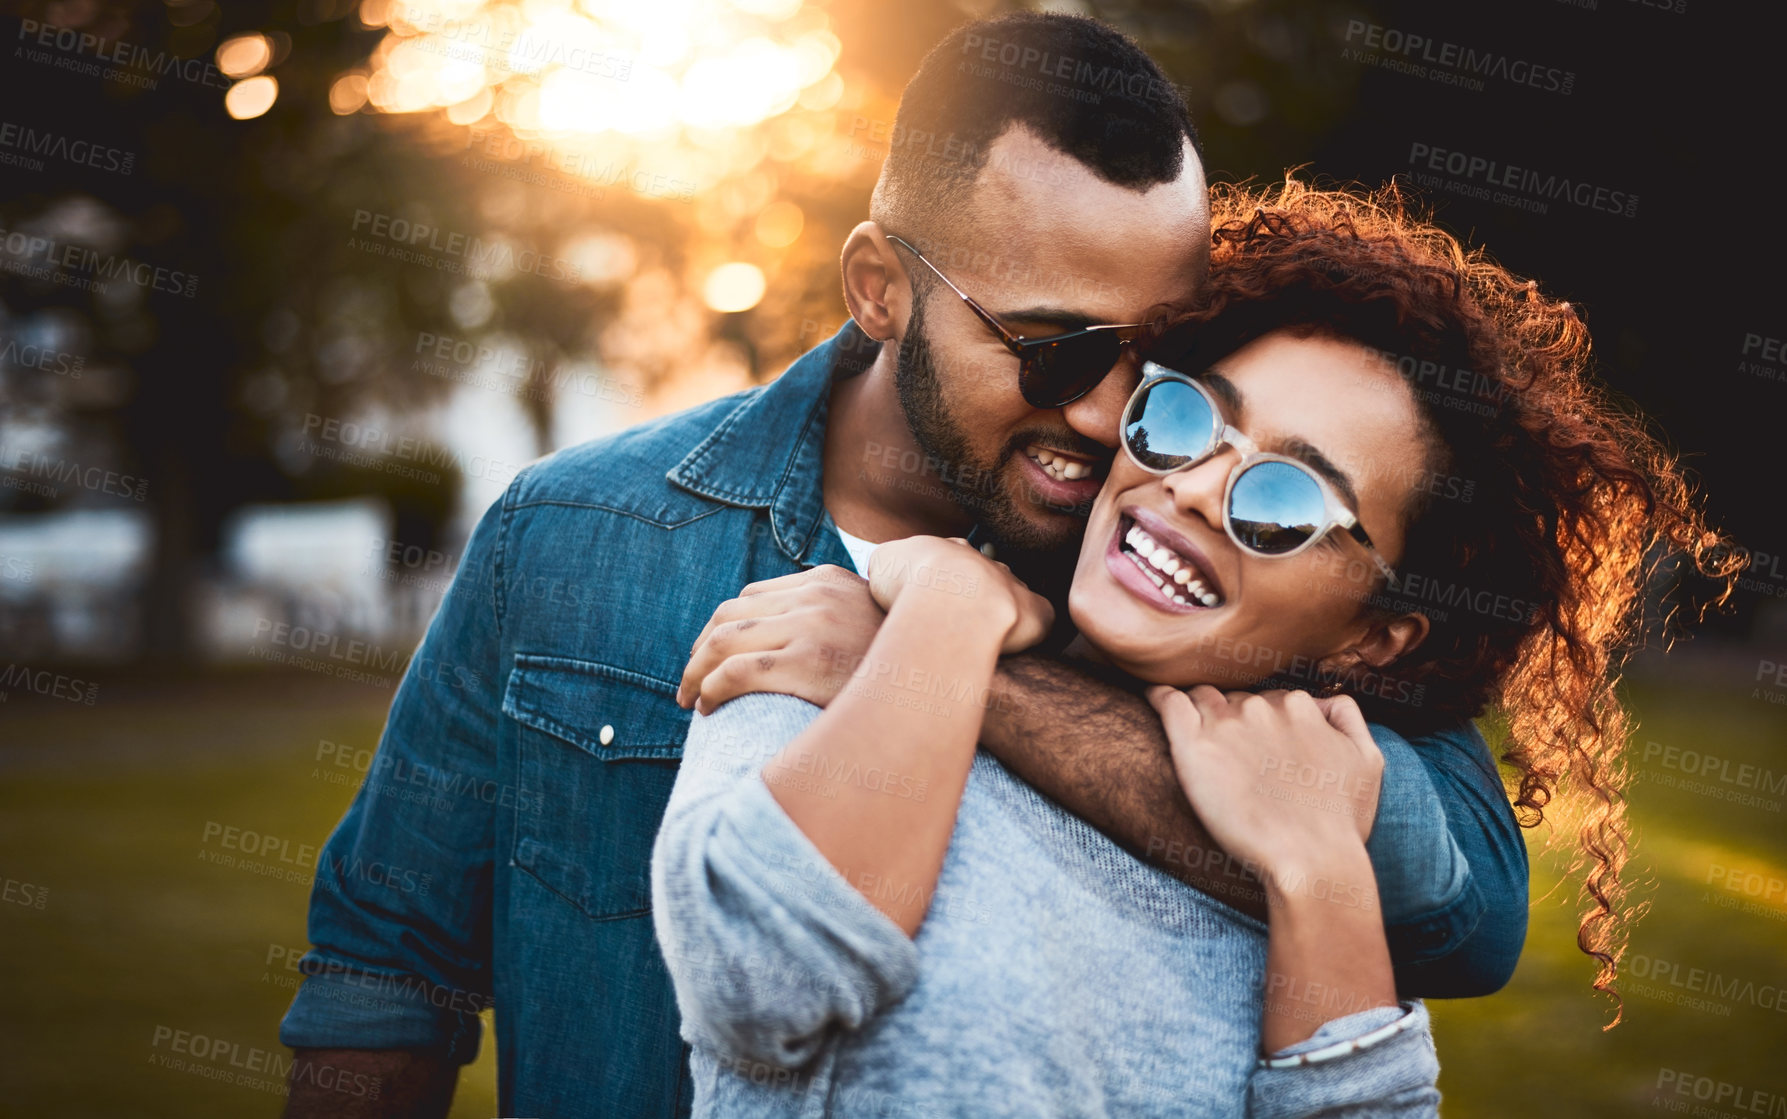 Buy stock photo Shot of a young couple bonding together outdoors